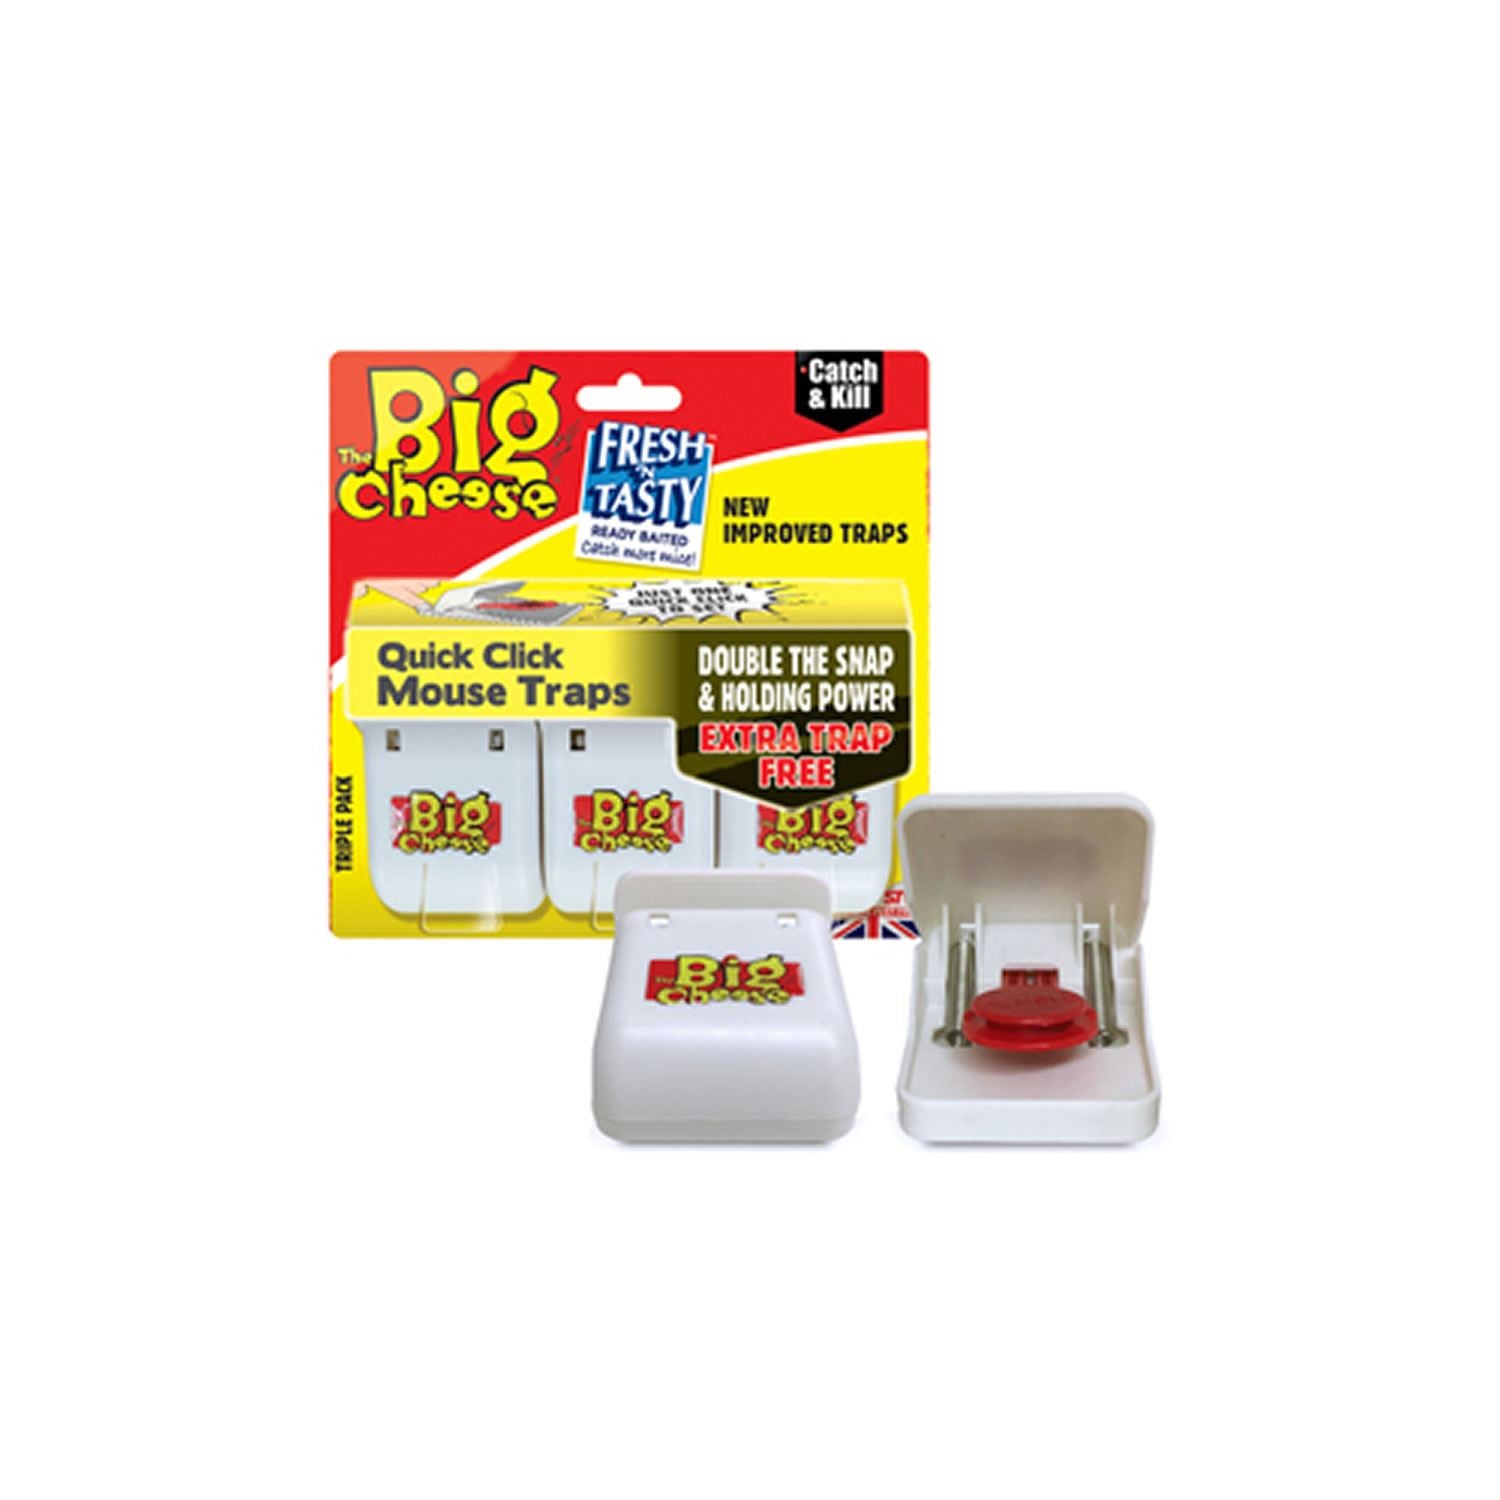 The Big Cheese Quick Click Mouse Trap - Just Horse Riders